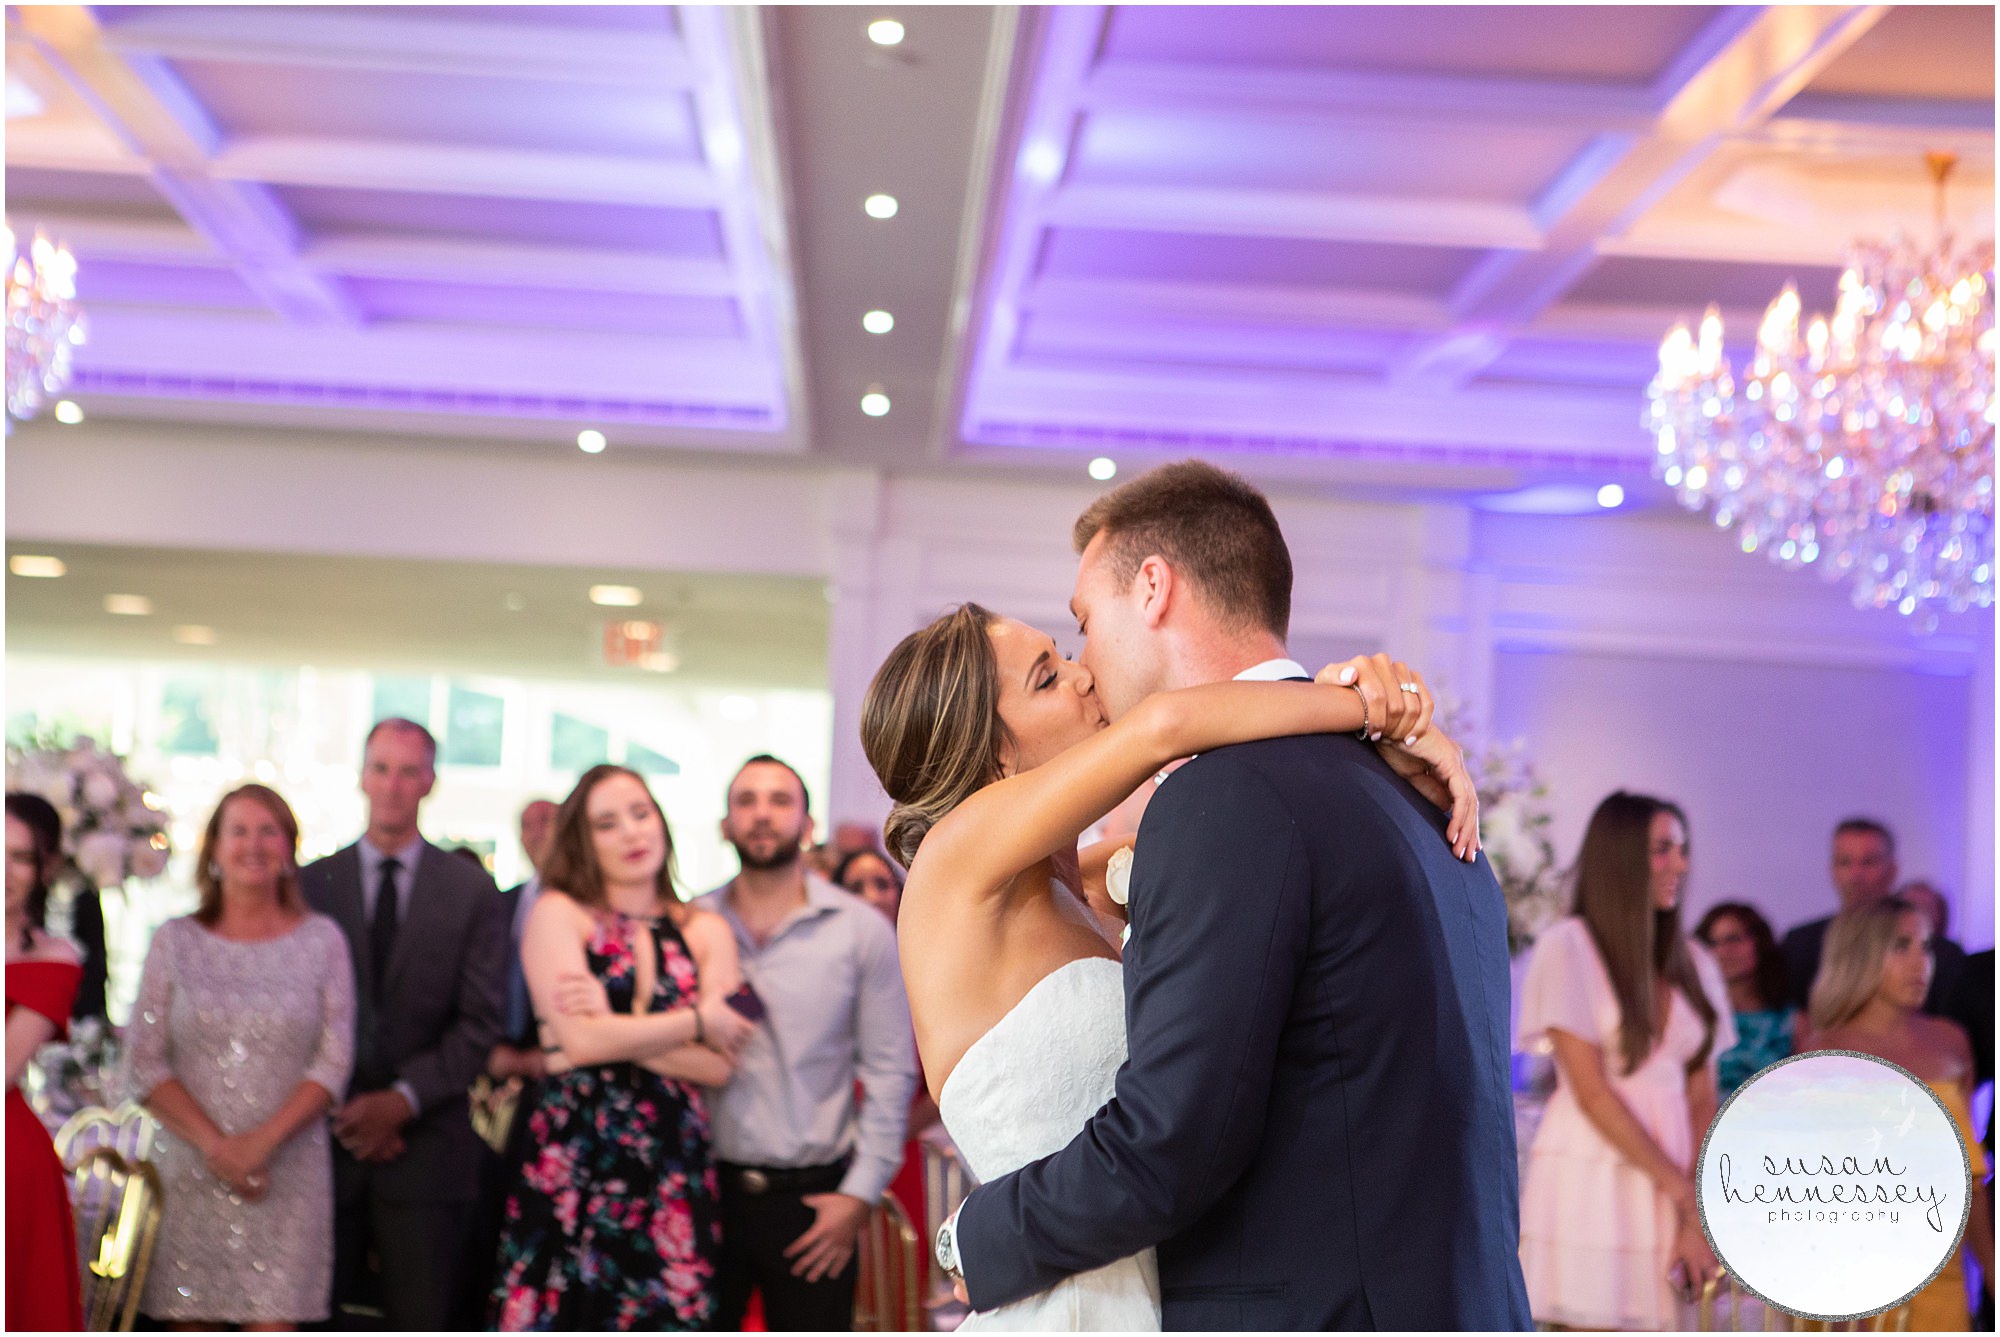 Bride and groom share a kiss during their first dance as a married couple.